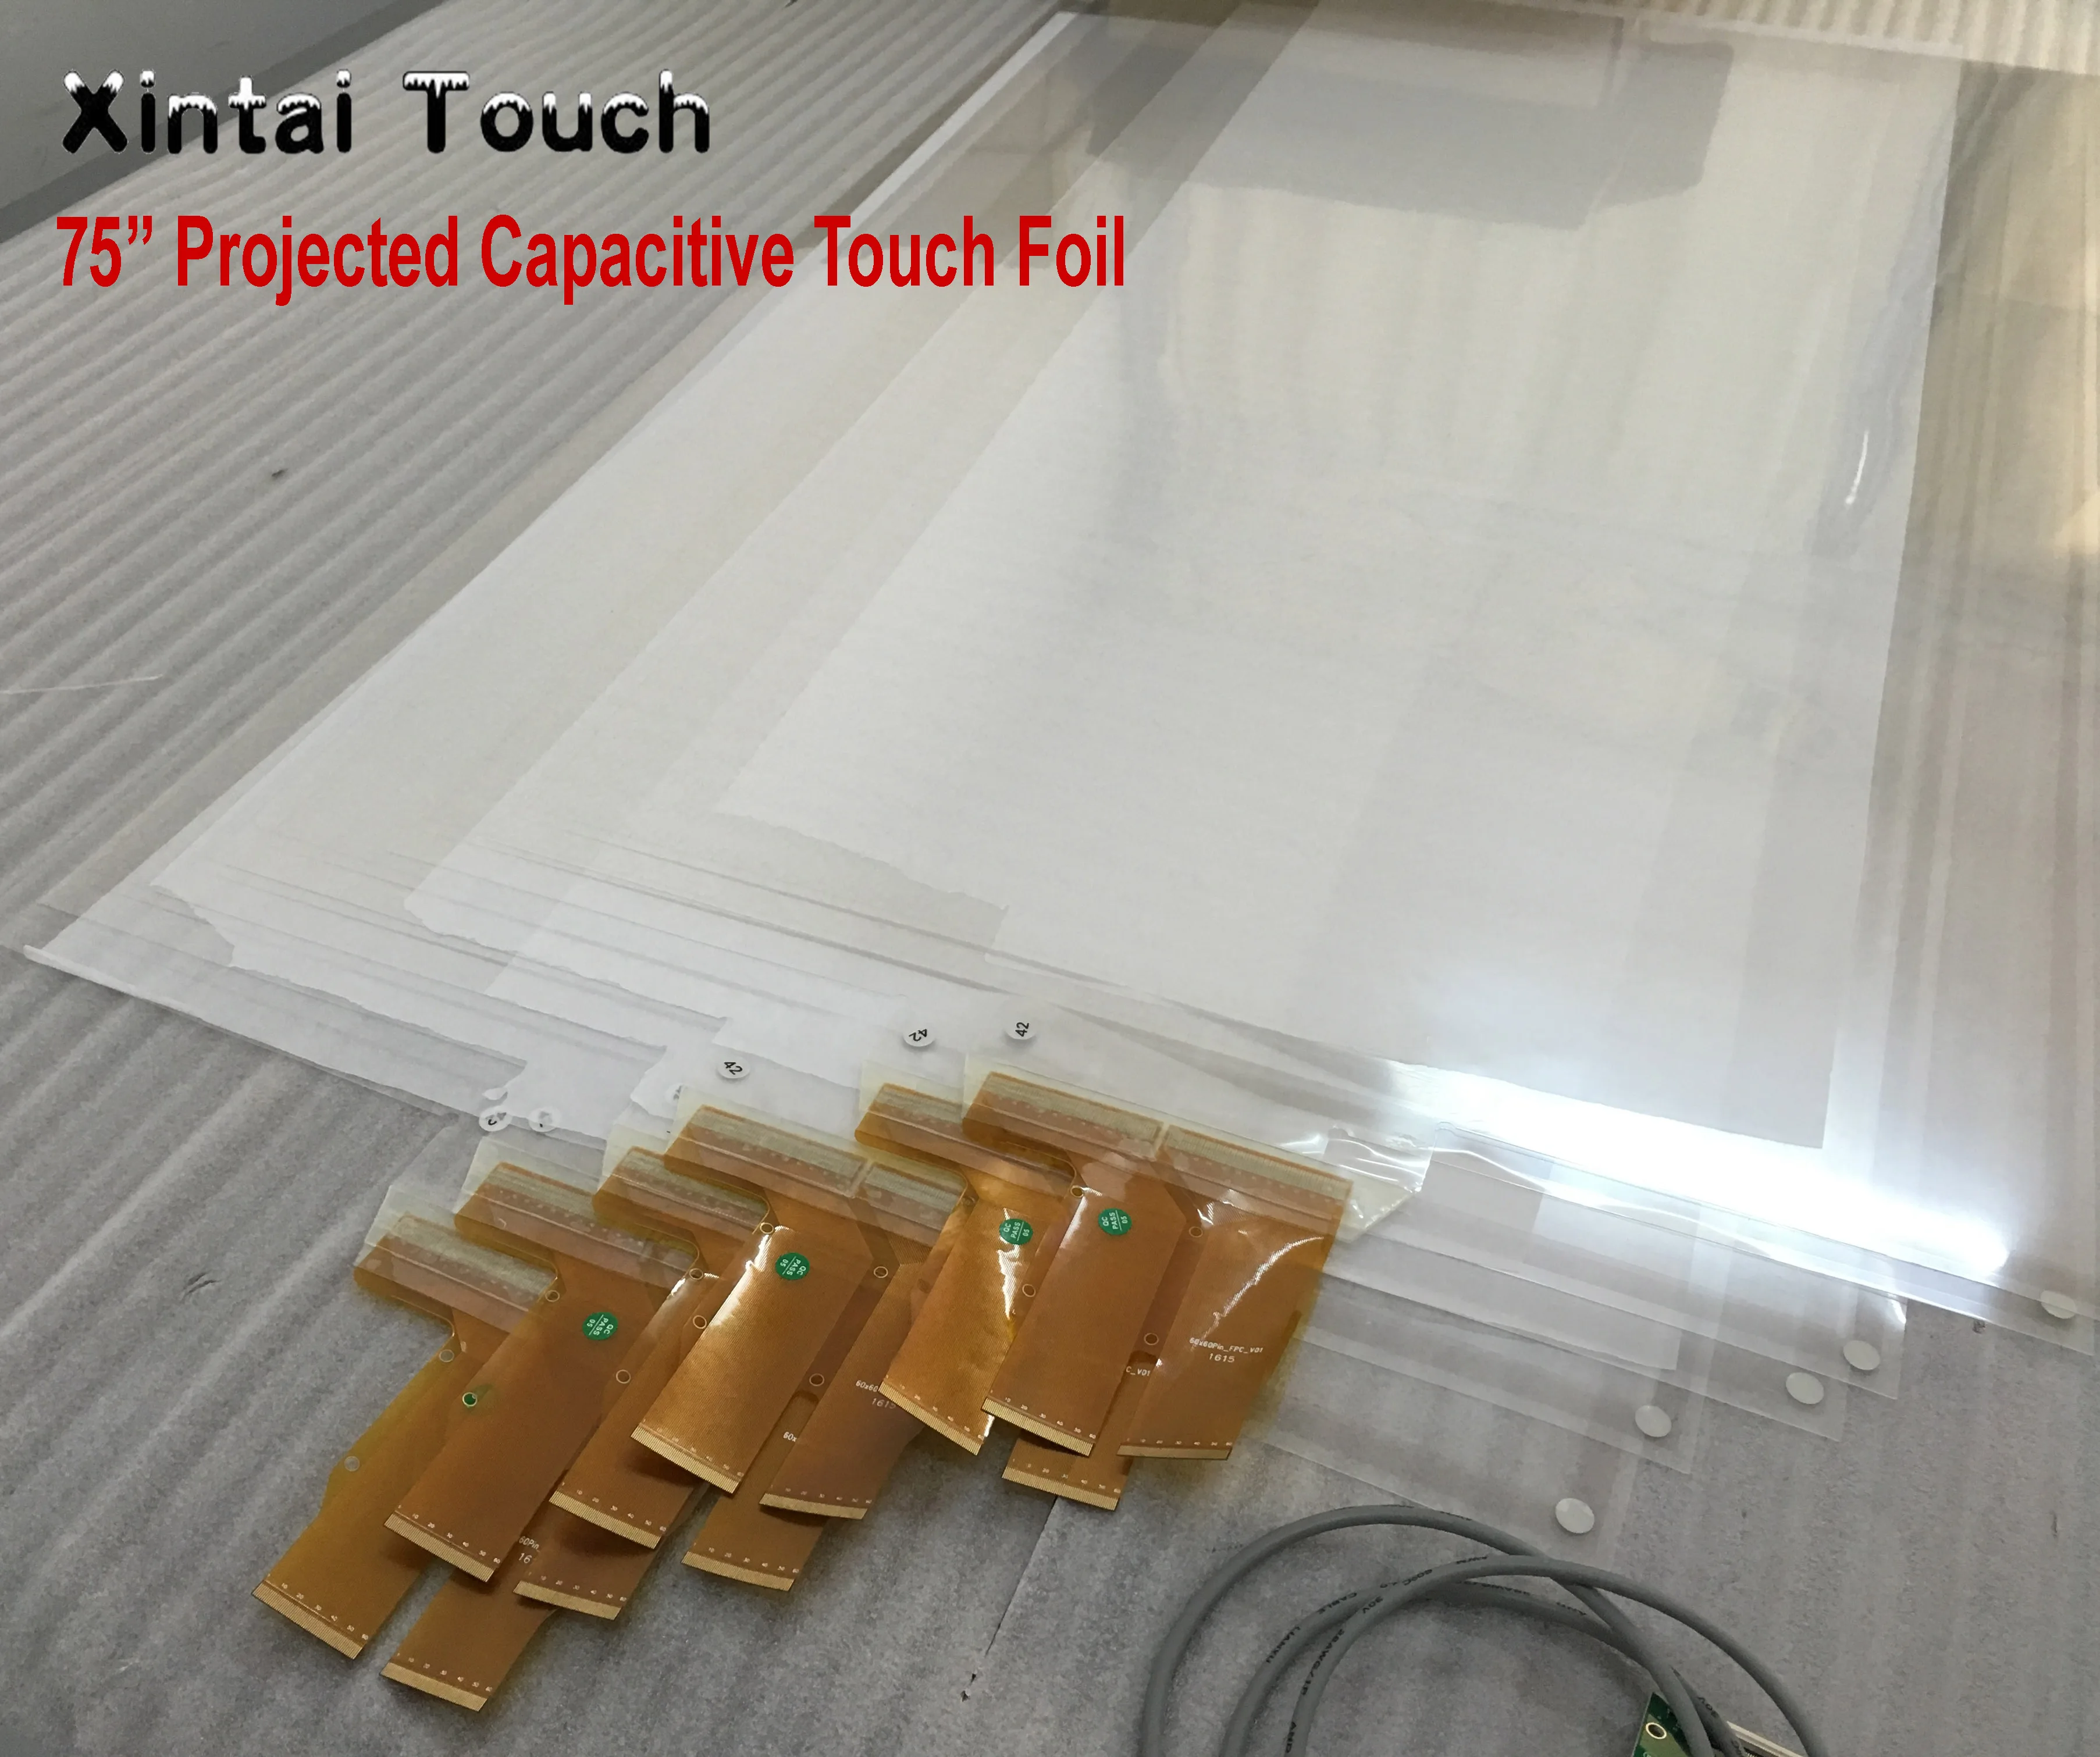 

Xintai Touch 75" truly 20 points interactive touch foil, capacitive foil touch film for Touch Monitor/Kiosk